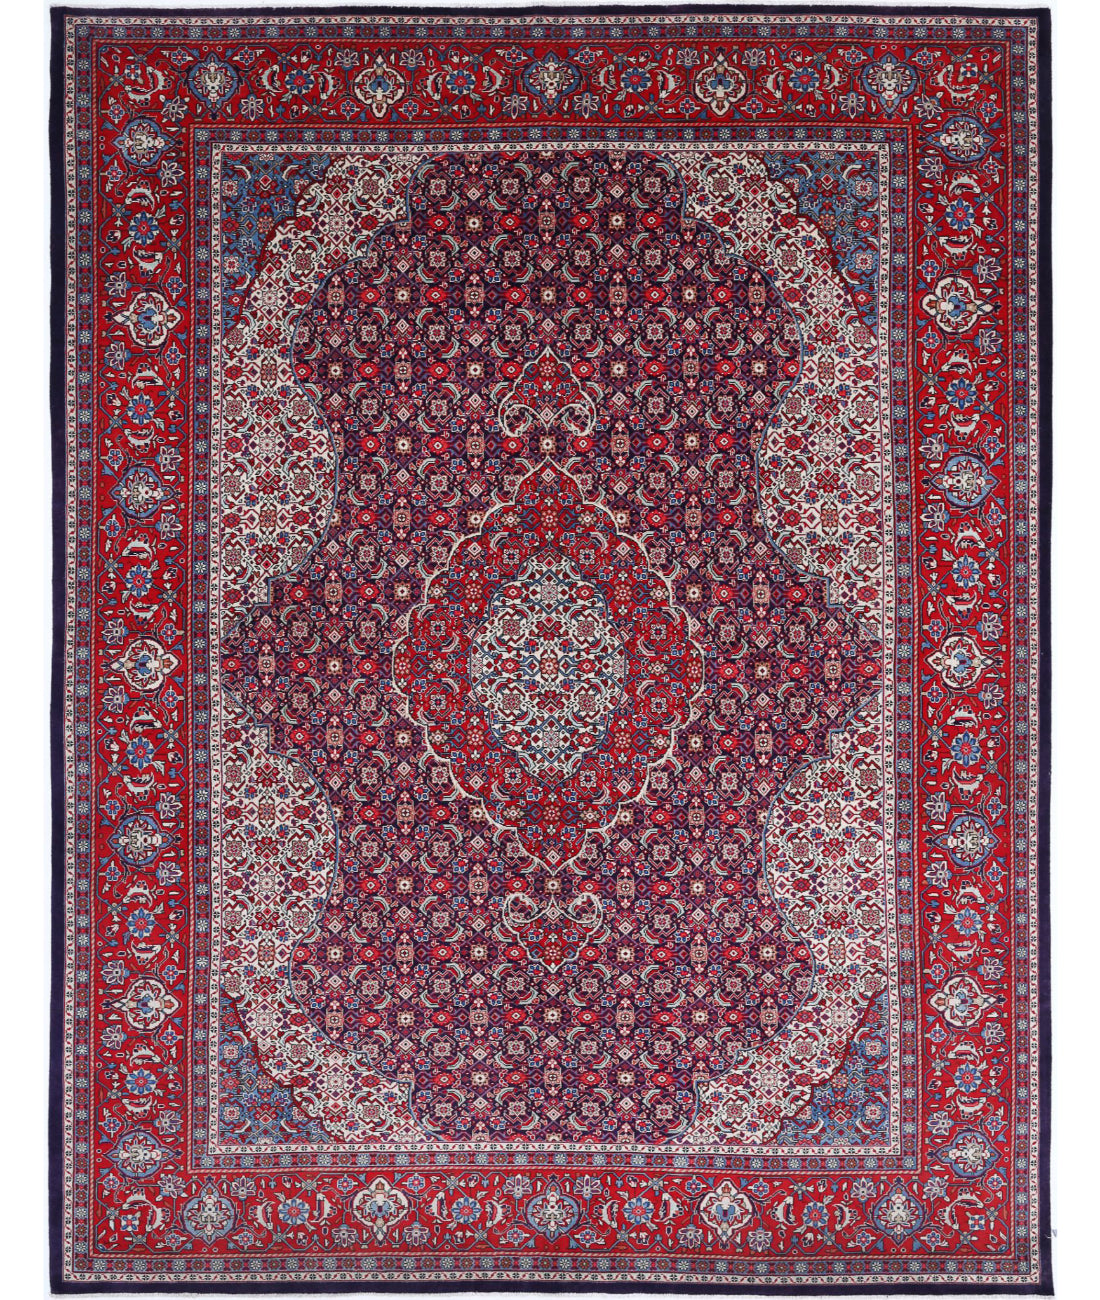 Hand Knotted Persian Tabriz Wool Rug - 8'0'' x 10'4'' 8'0'' x 10'4'' (240 X 310) / Blue / Red